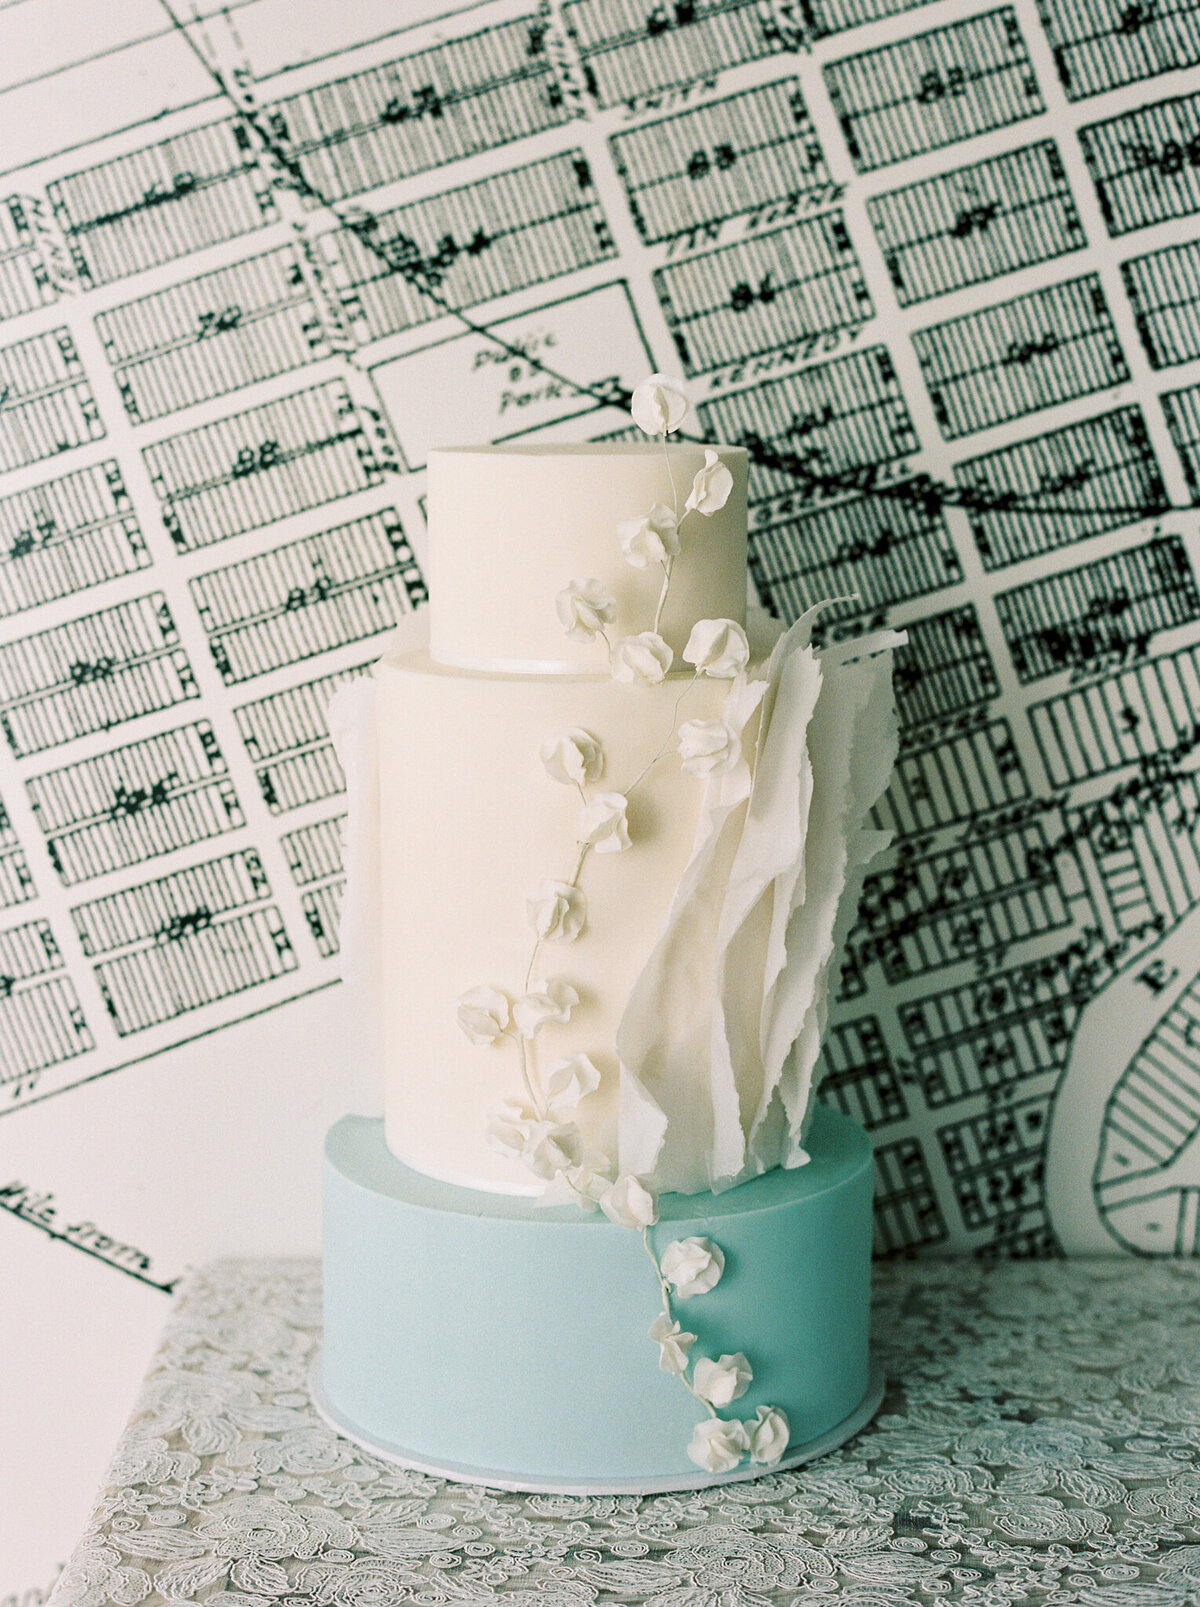 Beautifully handcrafted wedding cake with blue, teal and white tiers, and unique icing details, by Yvonne's Delightful Cakes, classic cakes & desserts in Calgary, Alberta, featured on the Brontë Bride Vendor Guide.